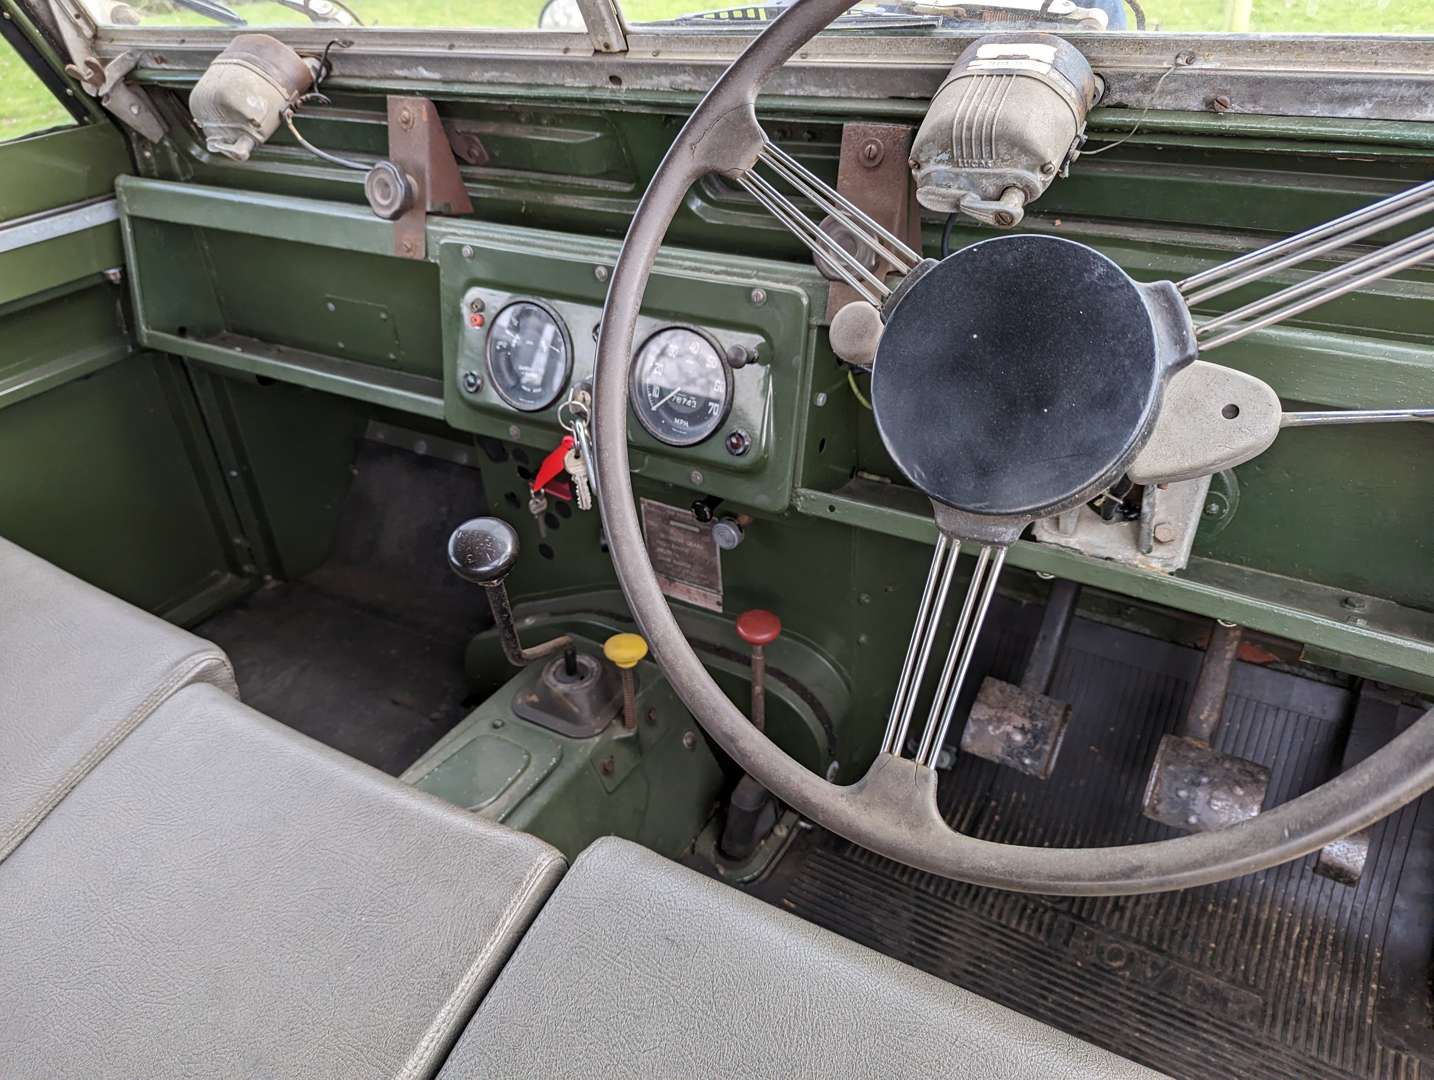 1958 LAND ROVER SWB SERIES II - Image 20 of 26